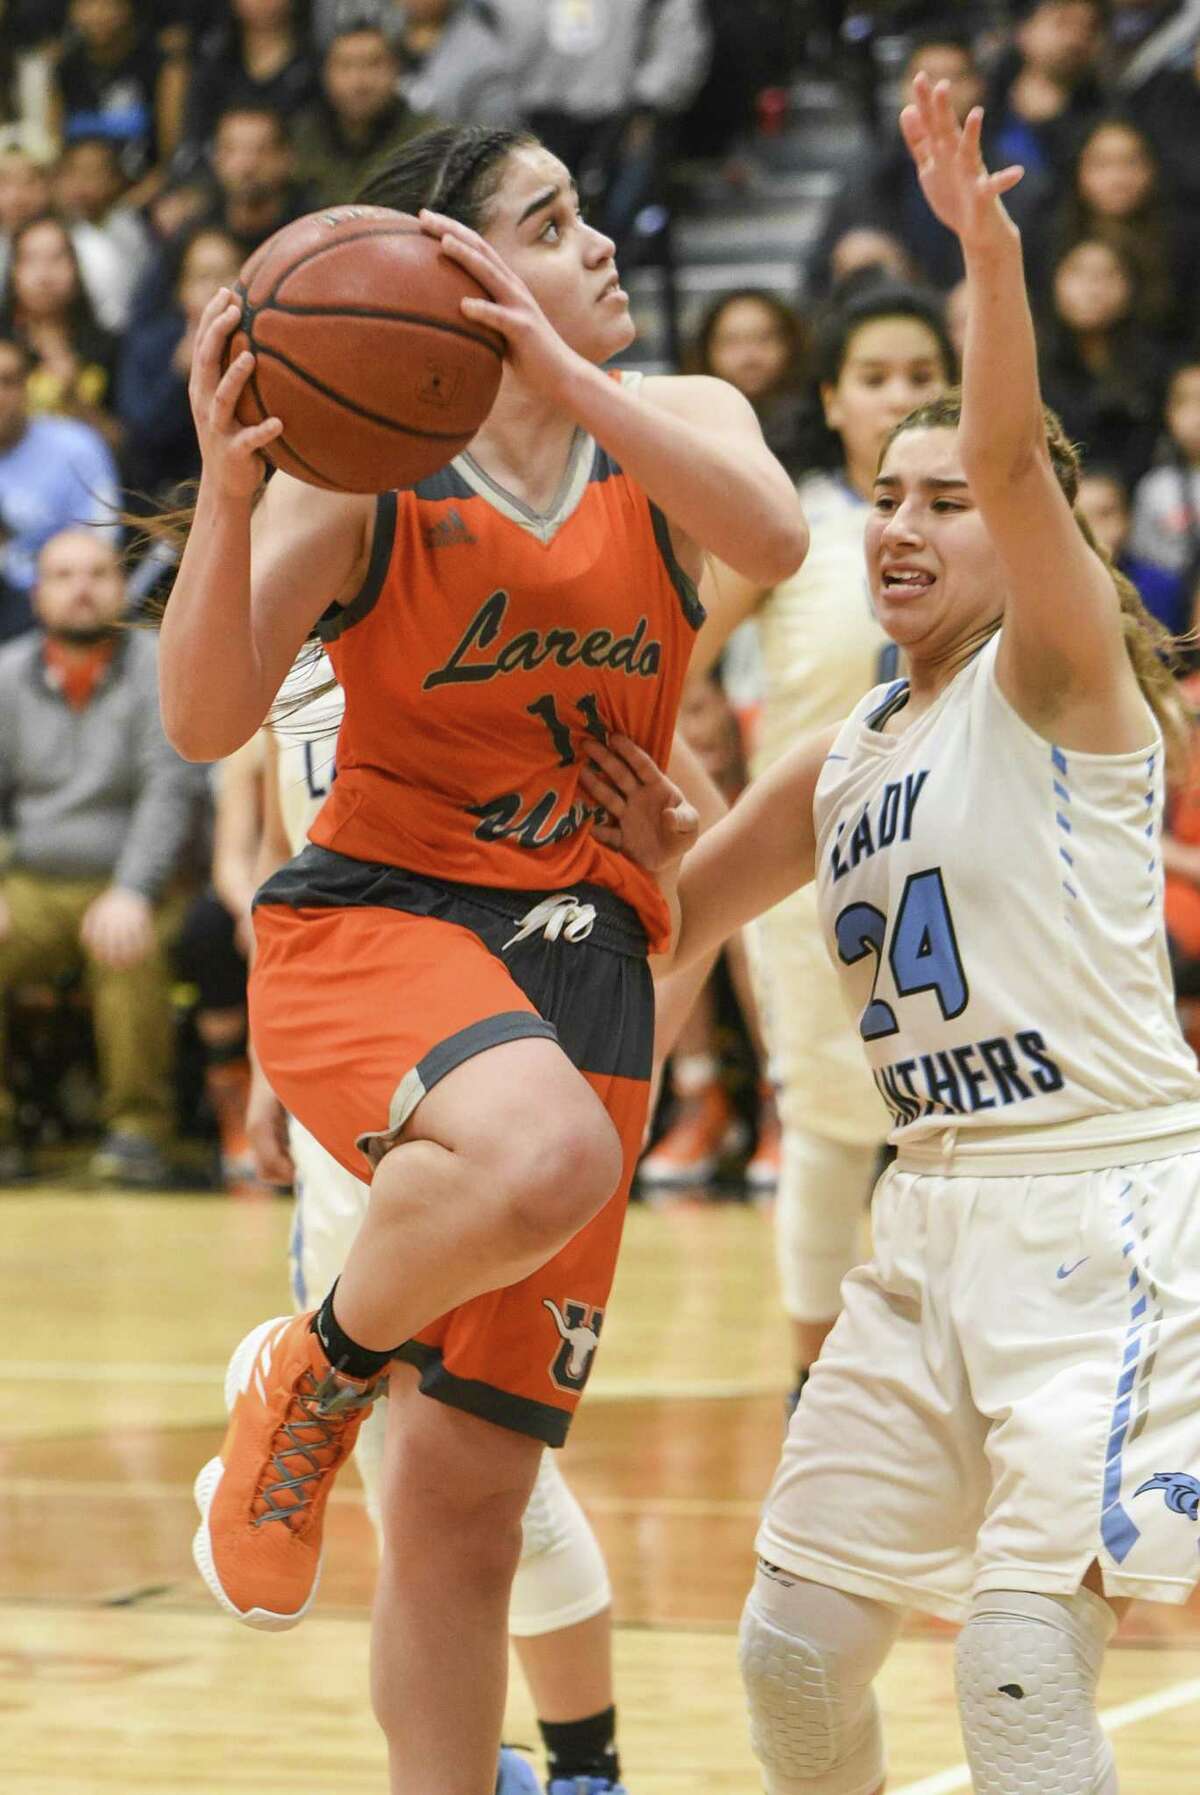 Olivia Campero finished with 10 points Tuesday in a 51-43 win at United South in the third round of the playoffs.